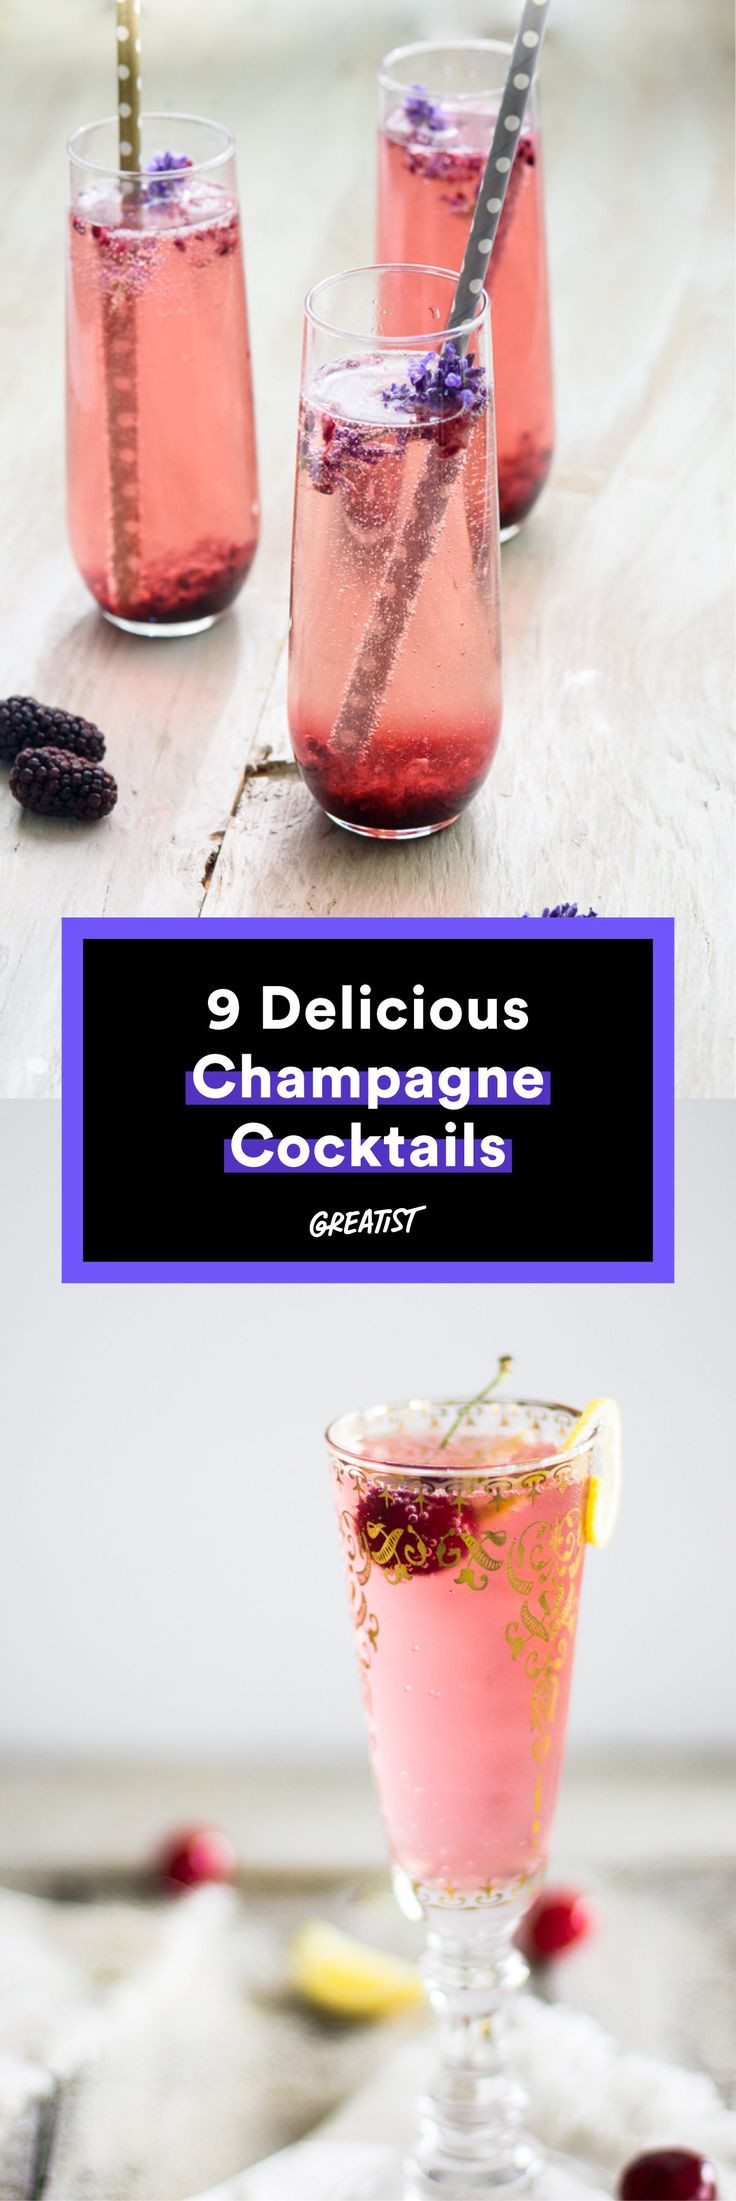 Too Short Cocktails
 Best 25 Cocktail recipes ideas on Pinterest